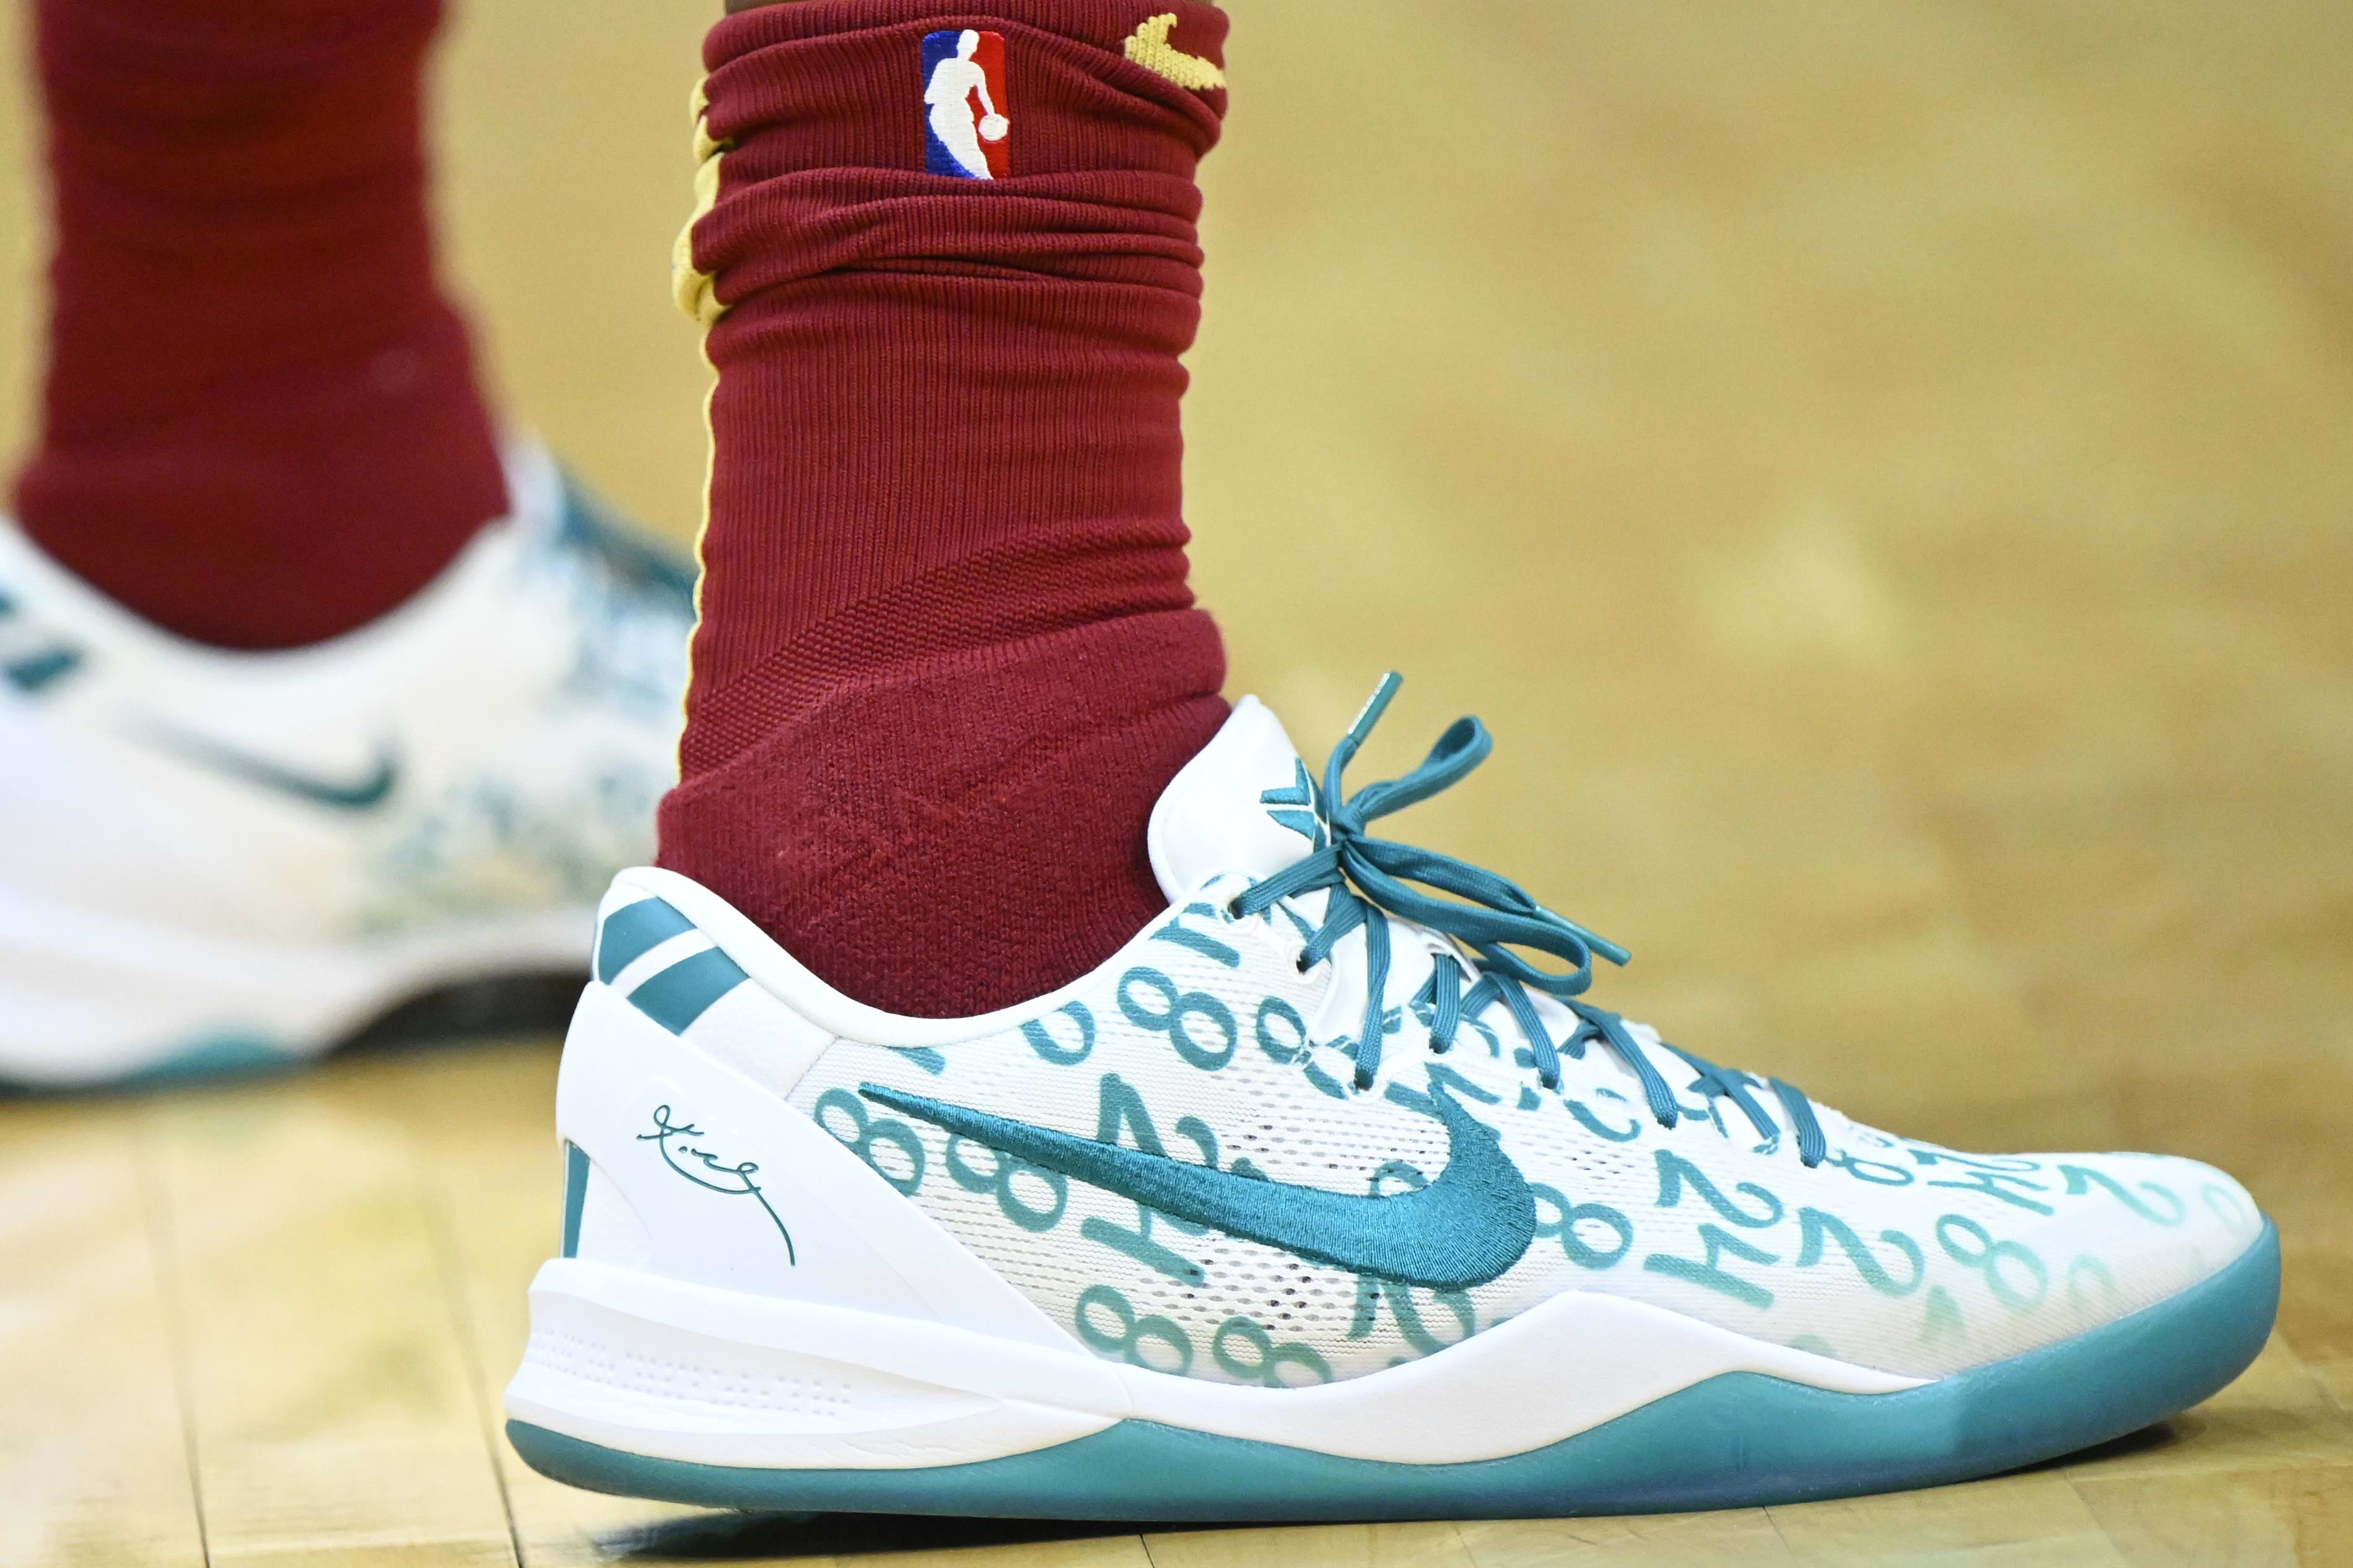 Cleveland Cavaliers forward Marcus Morris Sr.'s white and teal Nike sneakers.